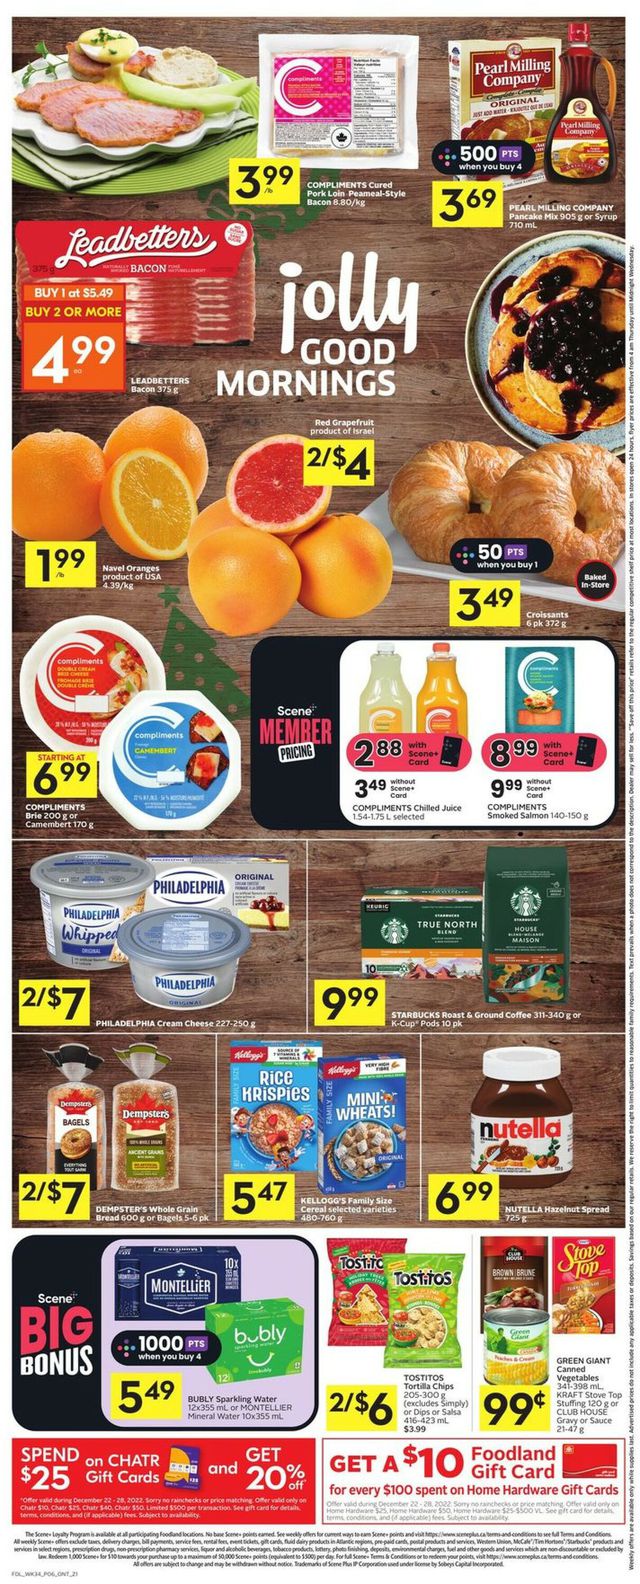 Foodland Flyer from 12/22/2022